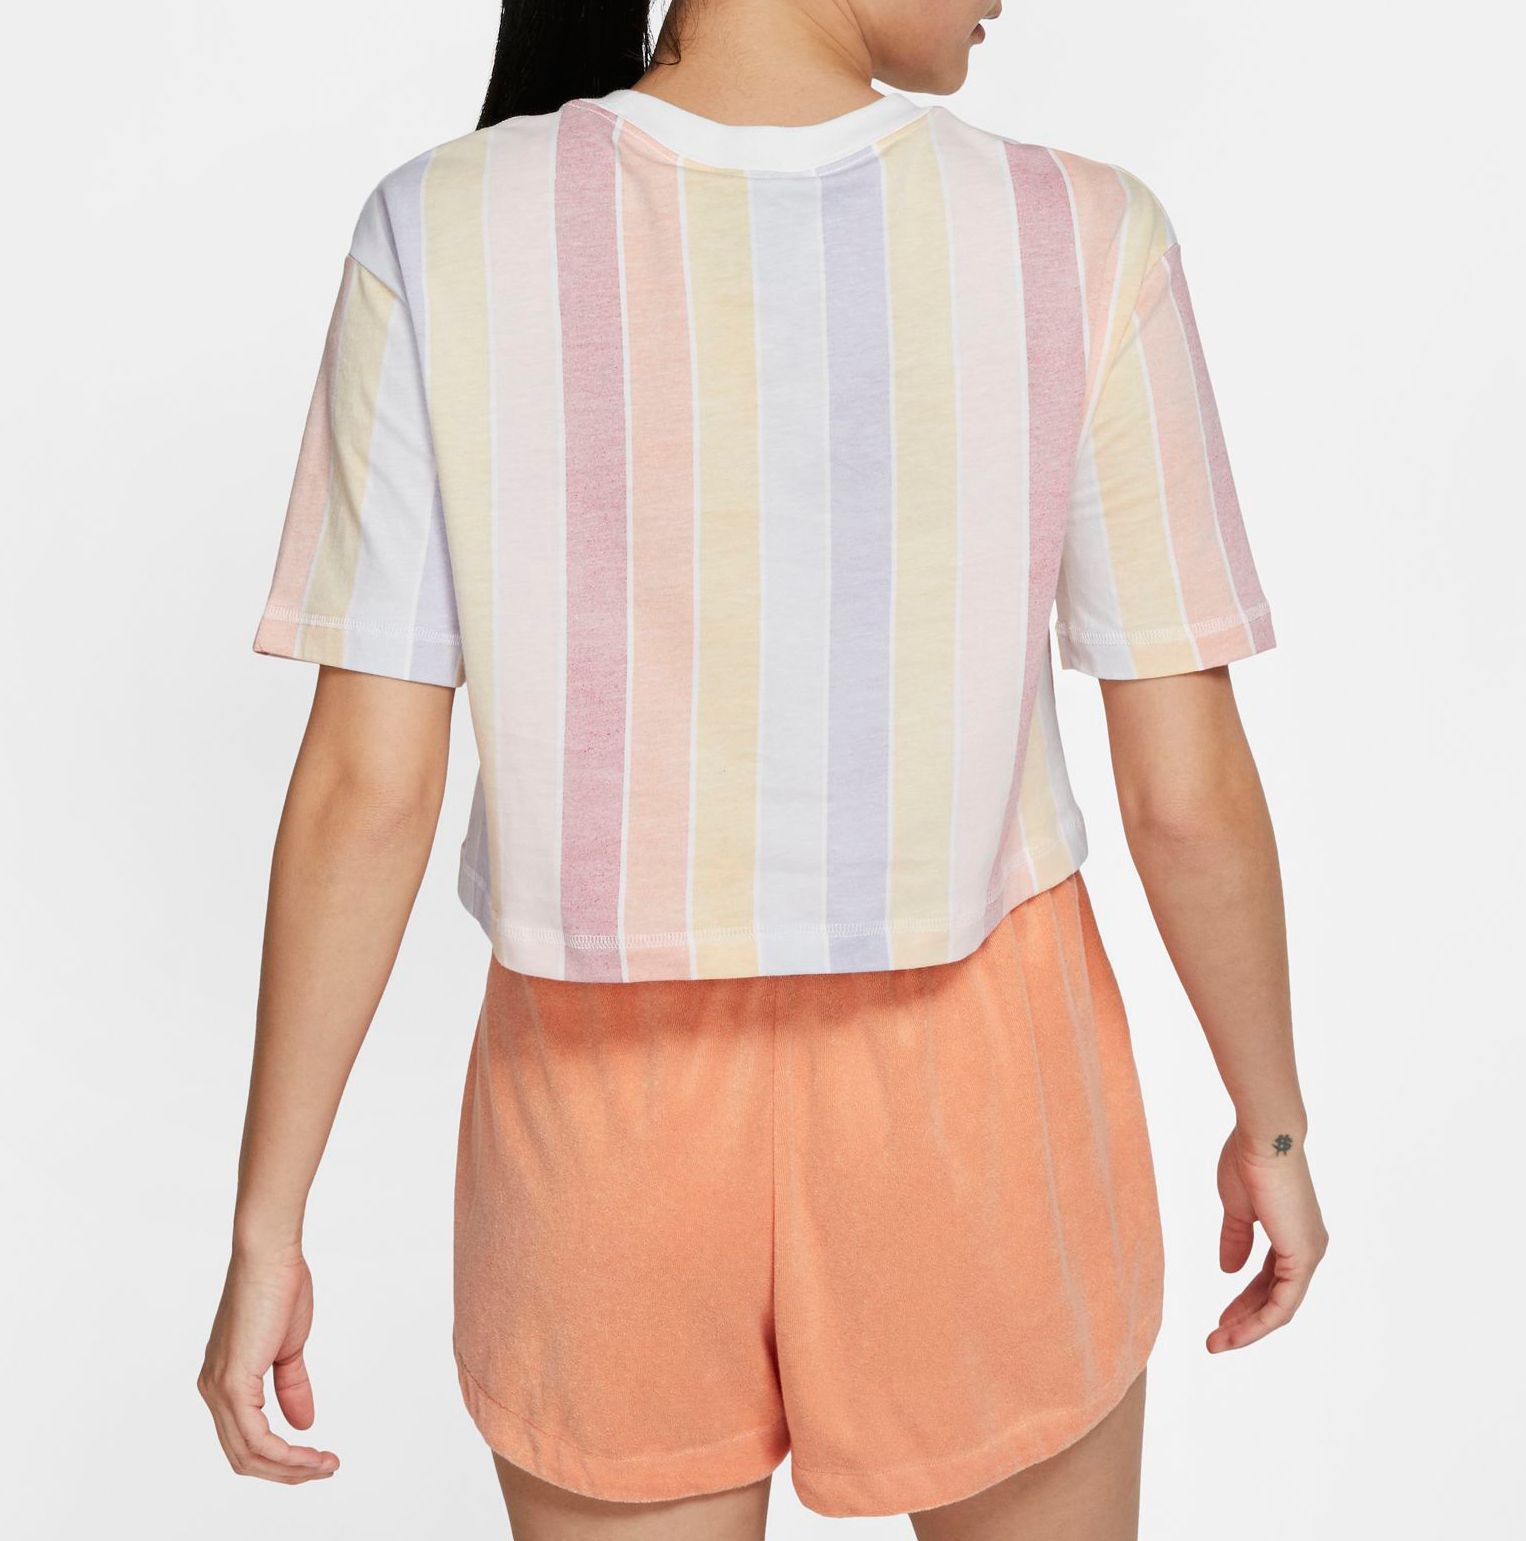 nike white crop top with striped sleeves